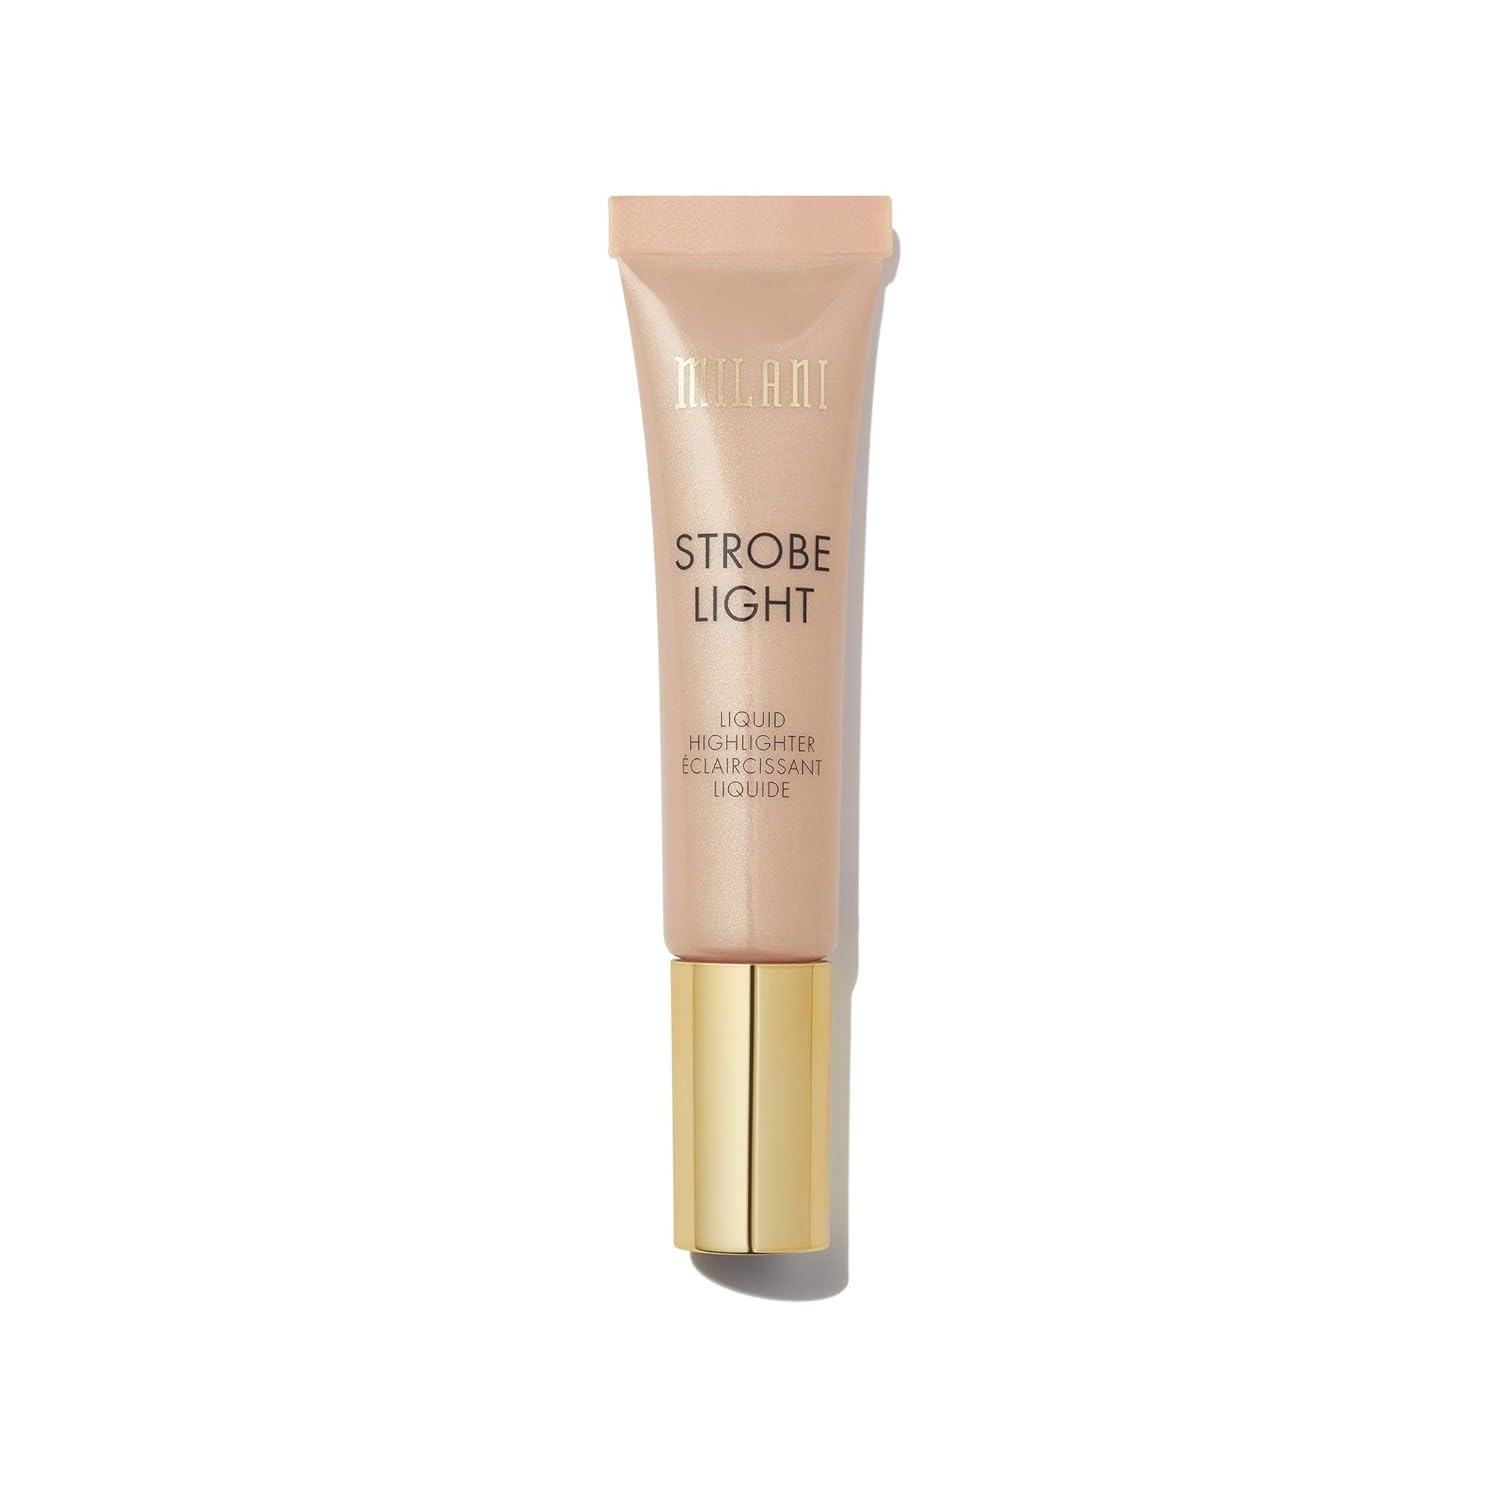 Milani Strobe Light Liquid Highlighter - Day Glow (0.42 . .) Cruelty-Free Face Highlighter - Shape, Contour & Highlight Face with Liquid Shimmer Shades